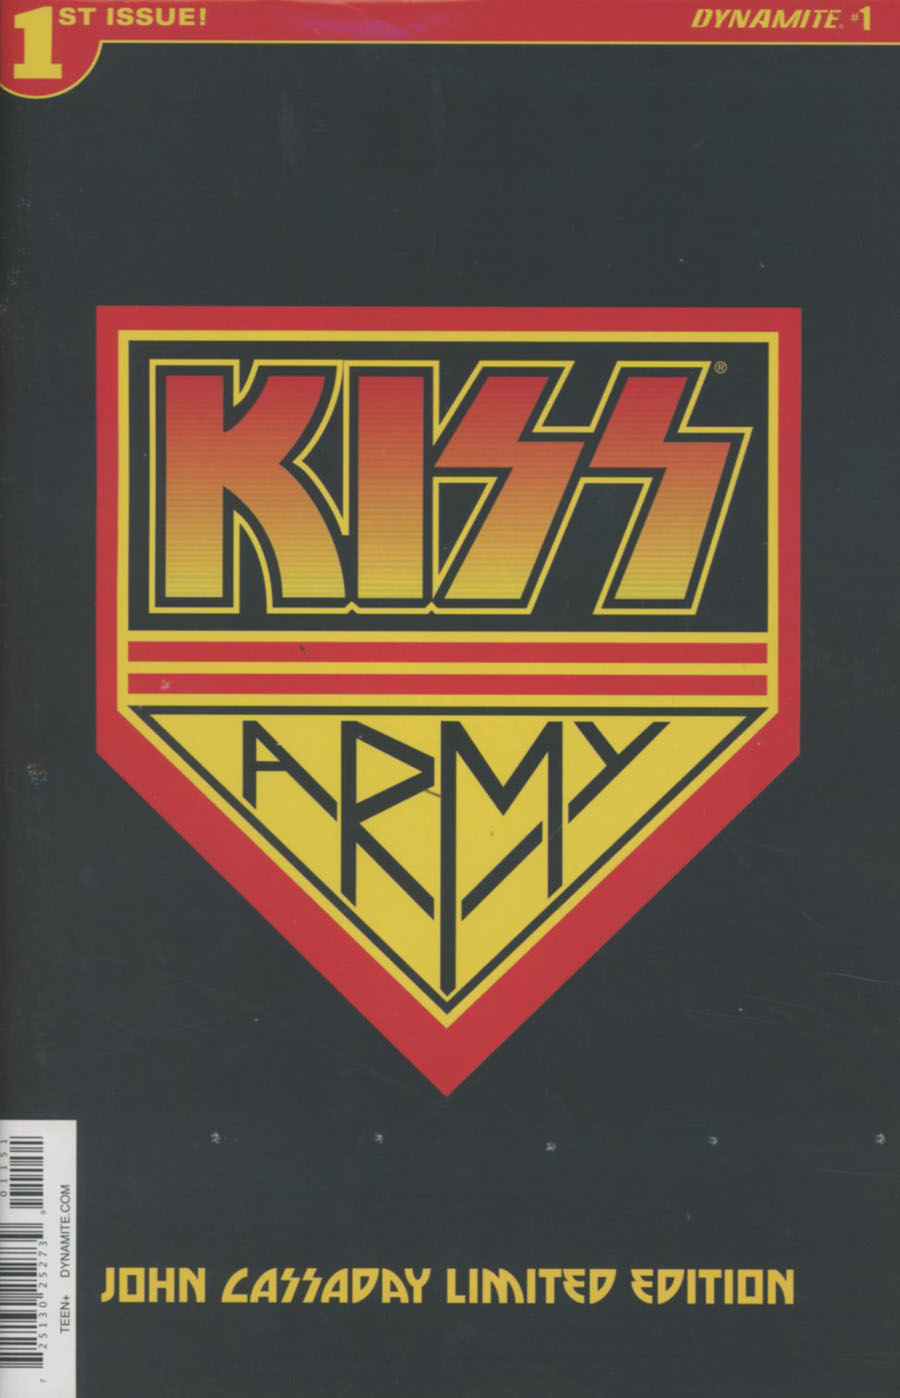 KISS Vol 3 #1 Cover Q Limited Edition John Cassaday KISS Army Edition Without Polybag